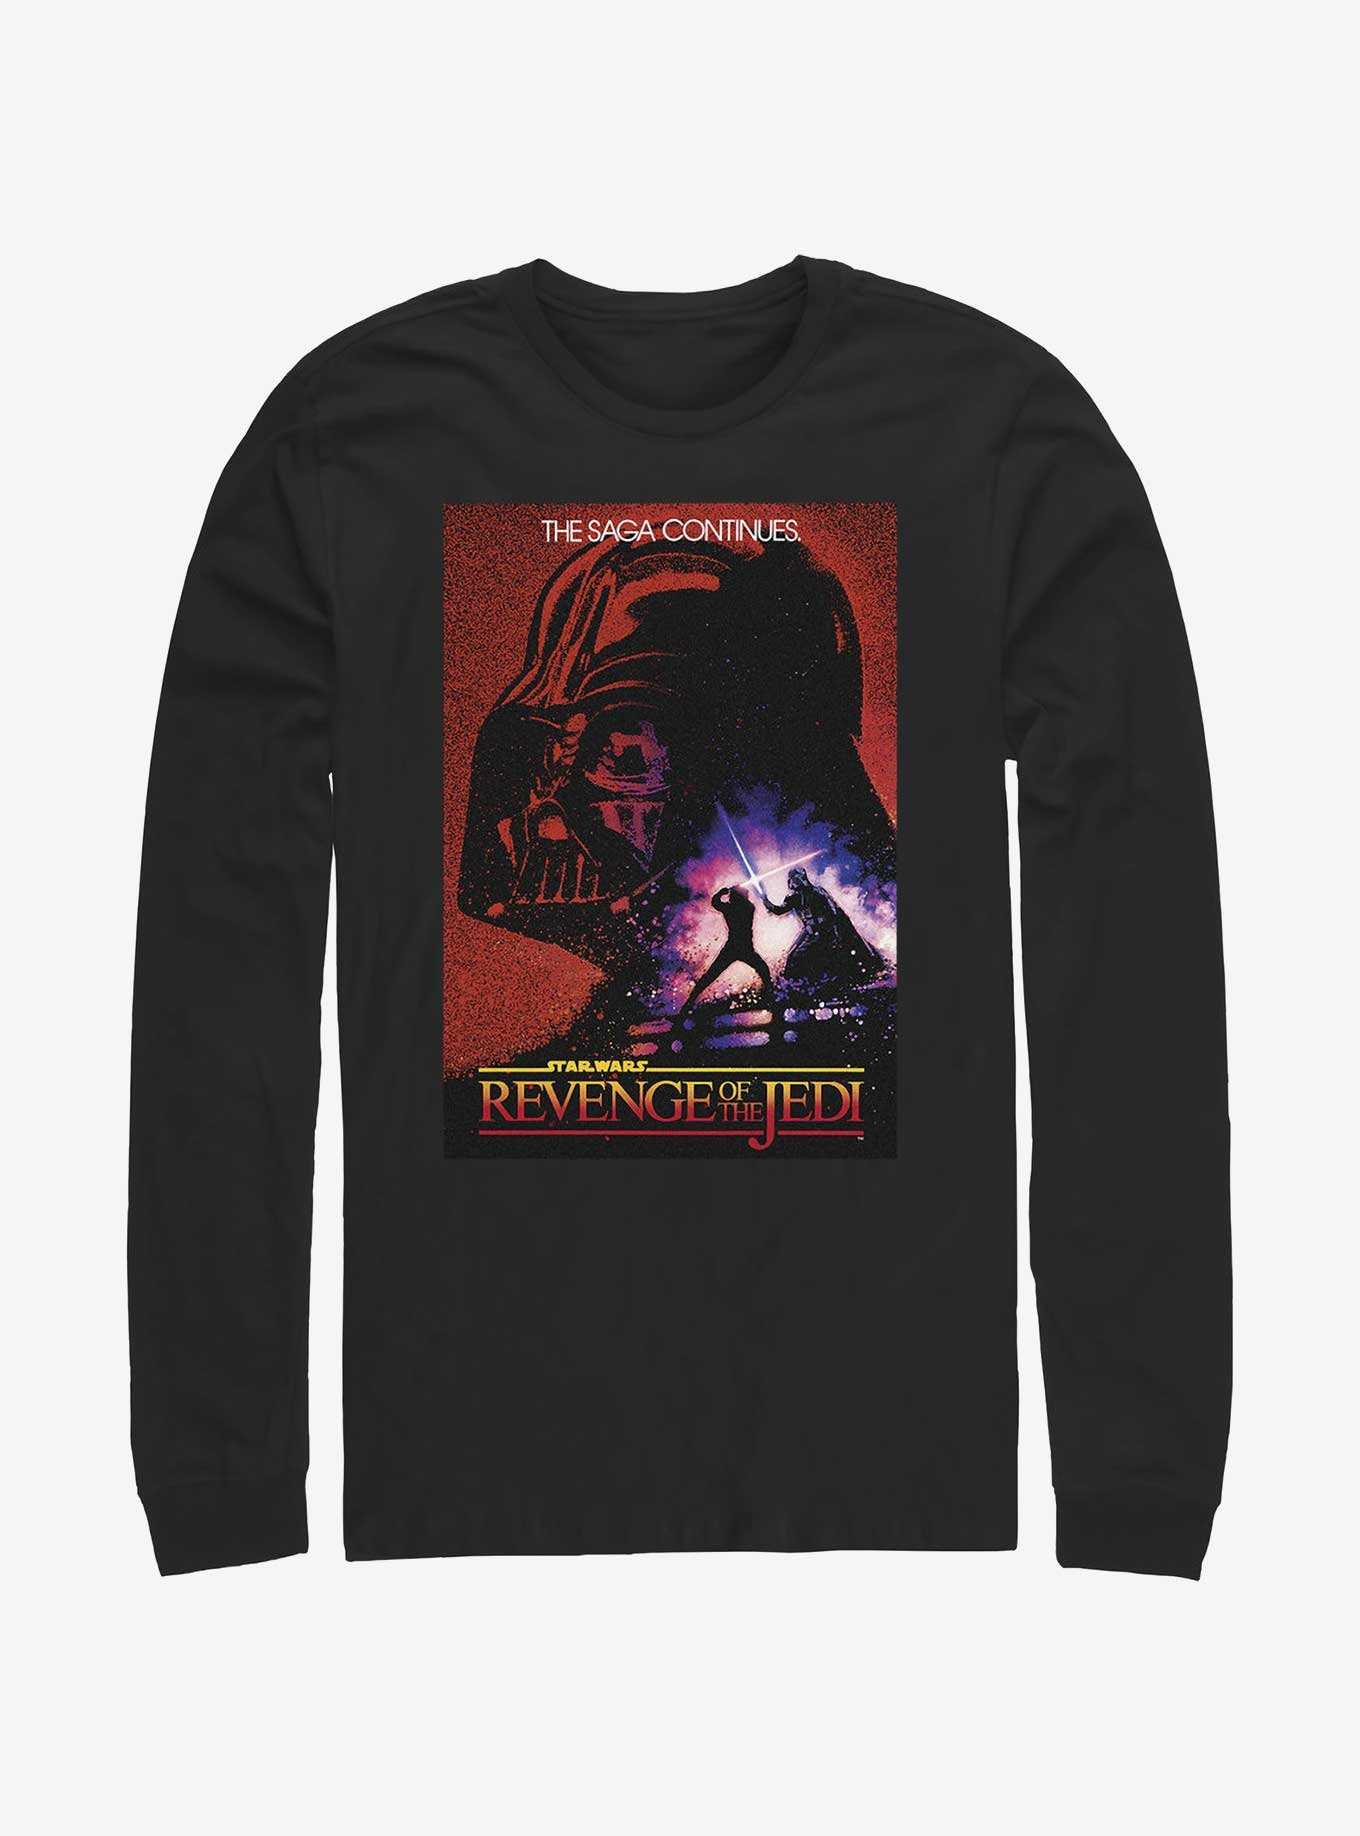 Star Wars Revenge of the Jedi 40th Anniversary The Saga Continues Long-Sleeve T-Shirt, , hi-res